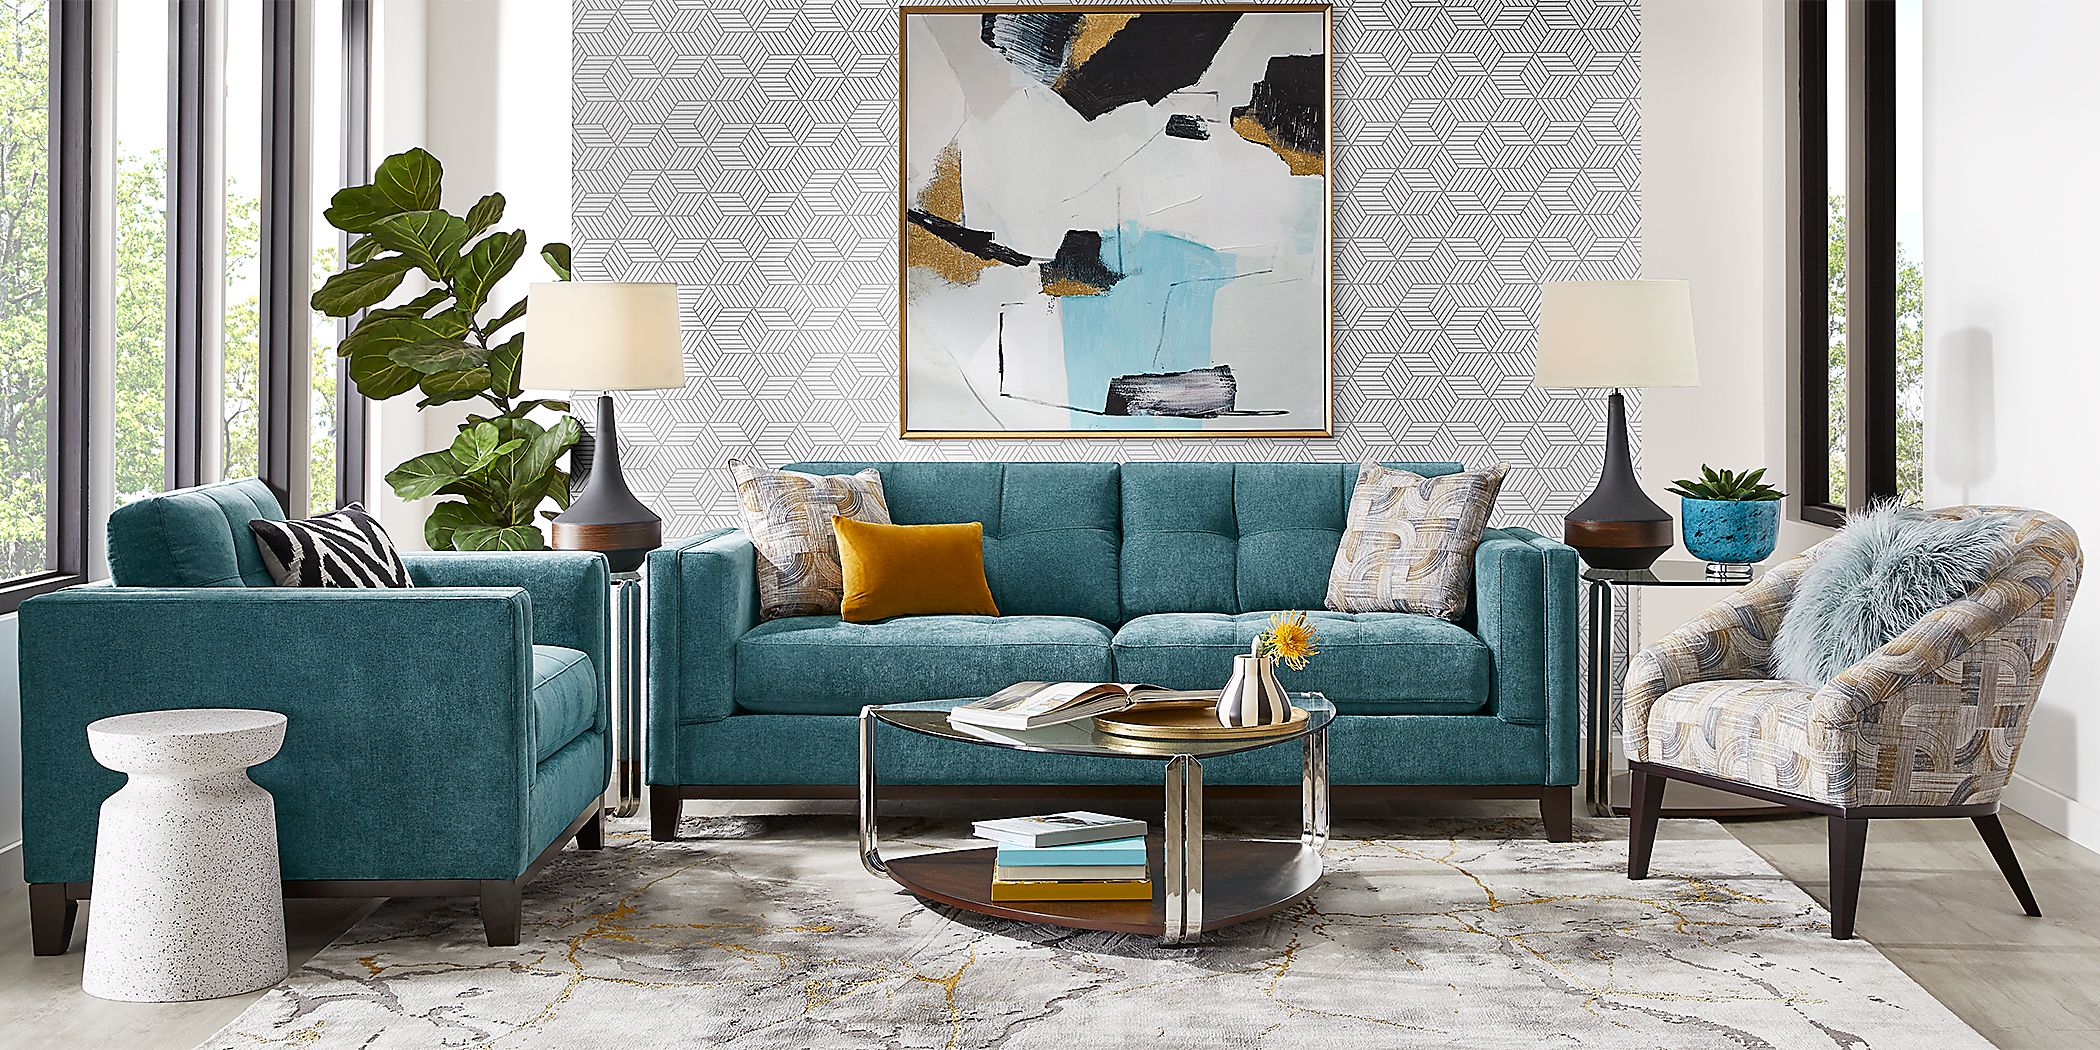 Cindy Crawford Everleigh Place 7 Pc Lagoon Blue Chenille Fabric Living Room Set With Sofa Loveseat 3 Table Lamp Rooms To Go